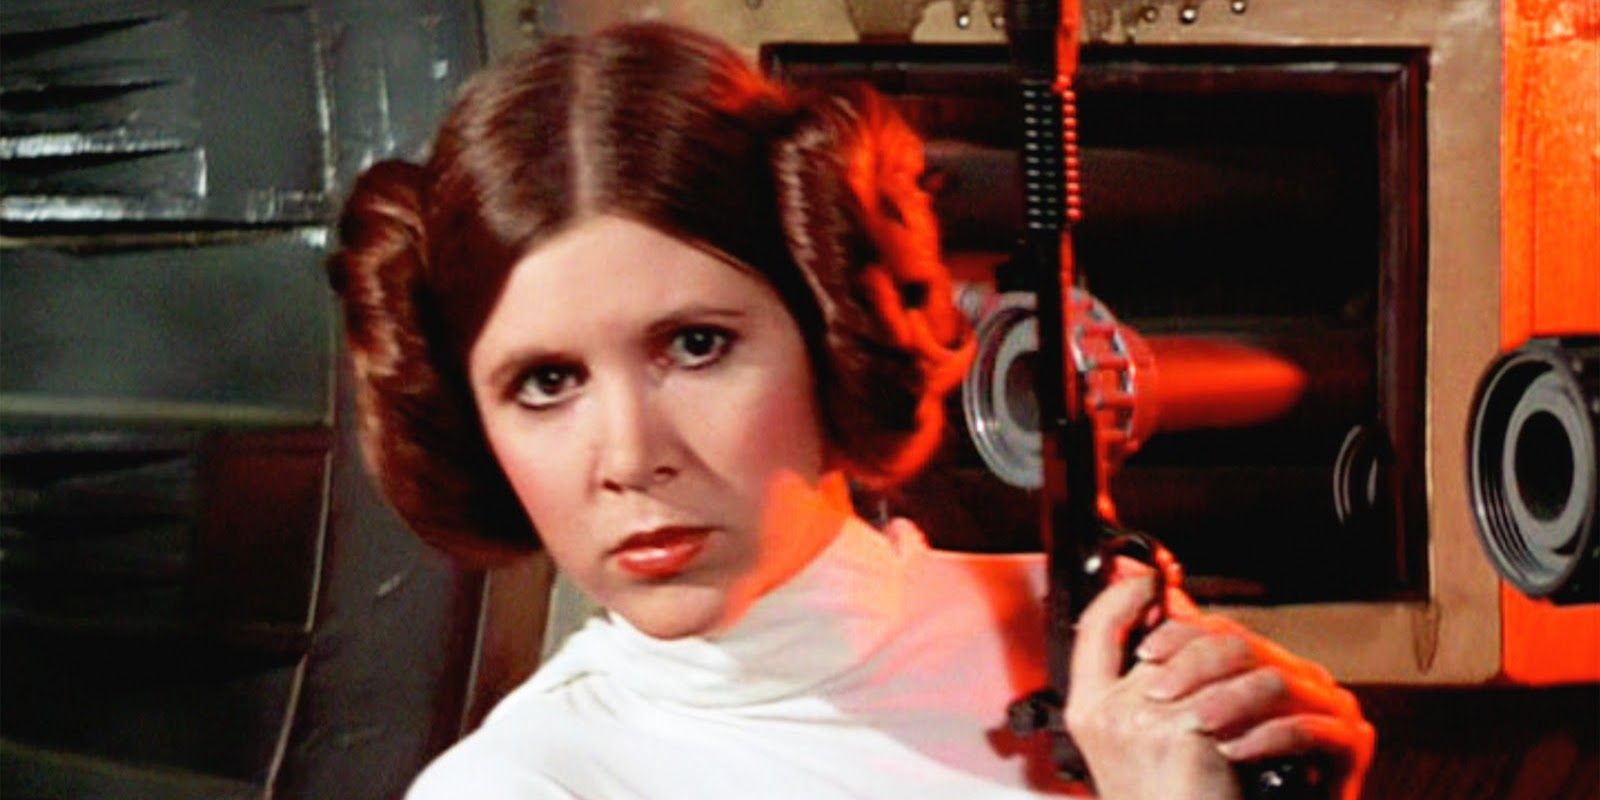 Princess Leia holding a blaster while peering around a bulkhead in A New Hope